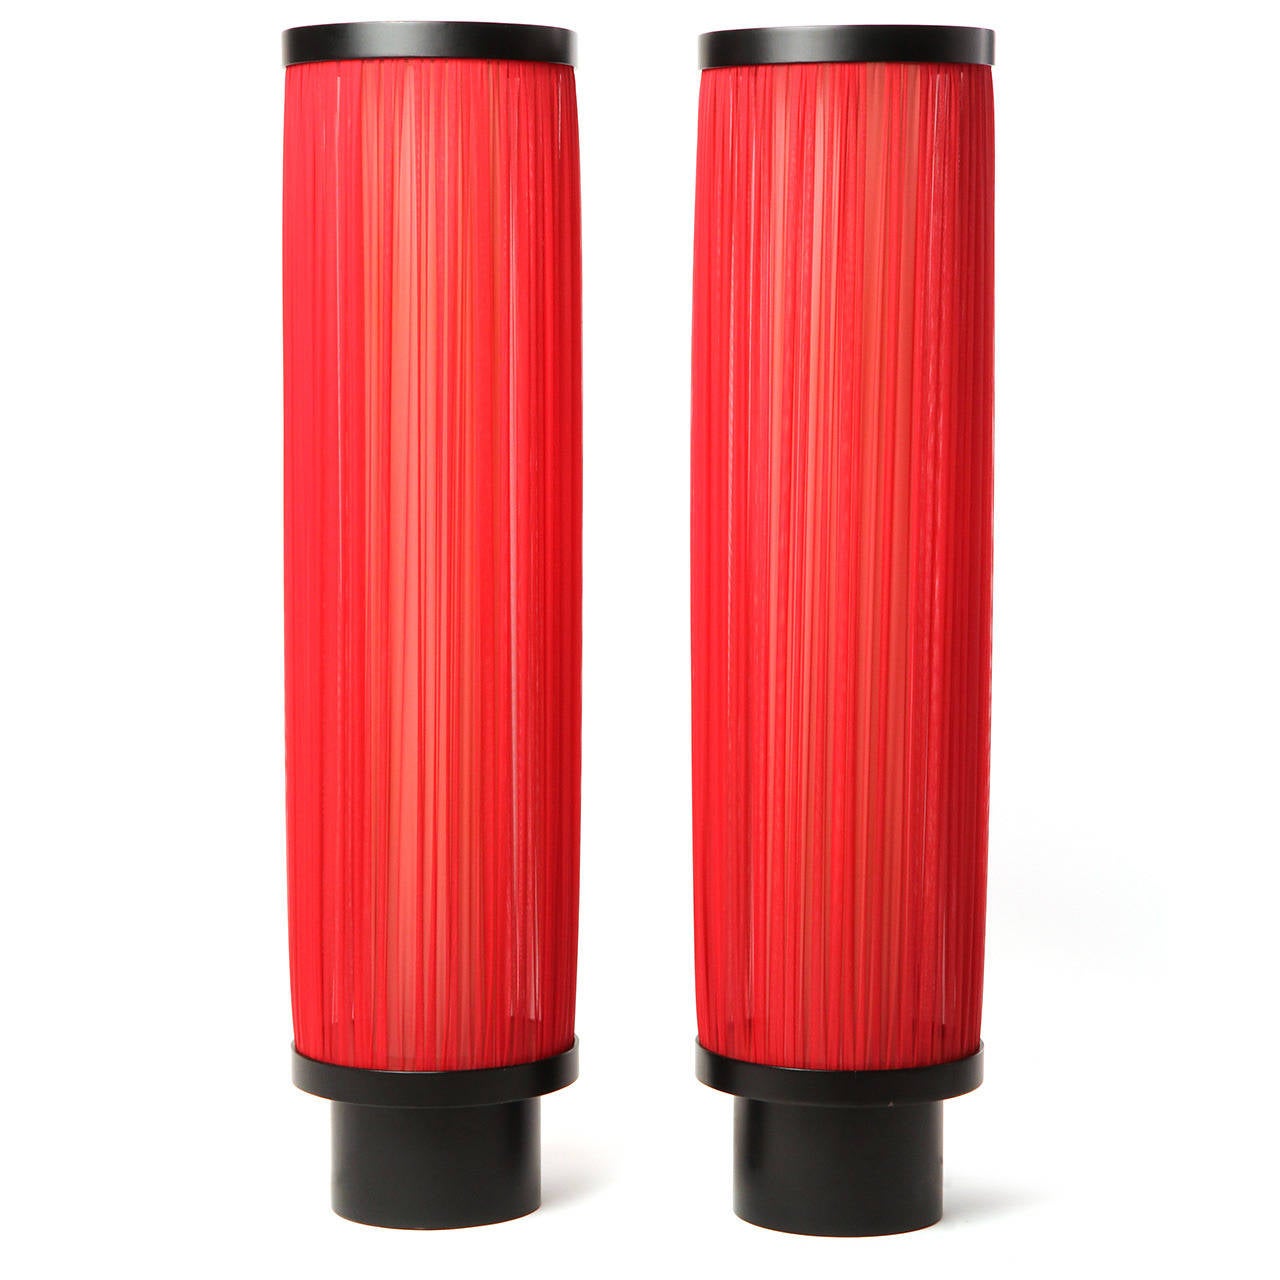 An unusual and highly expressive pair of tall columnar floor lamps having lacquered wooden bases supporting perspex tubes encircled by translucent swaths of crimson fabric.